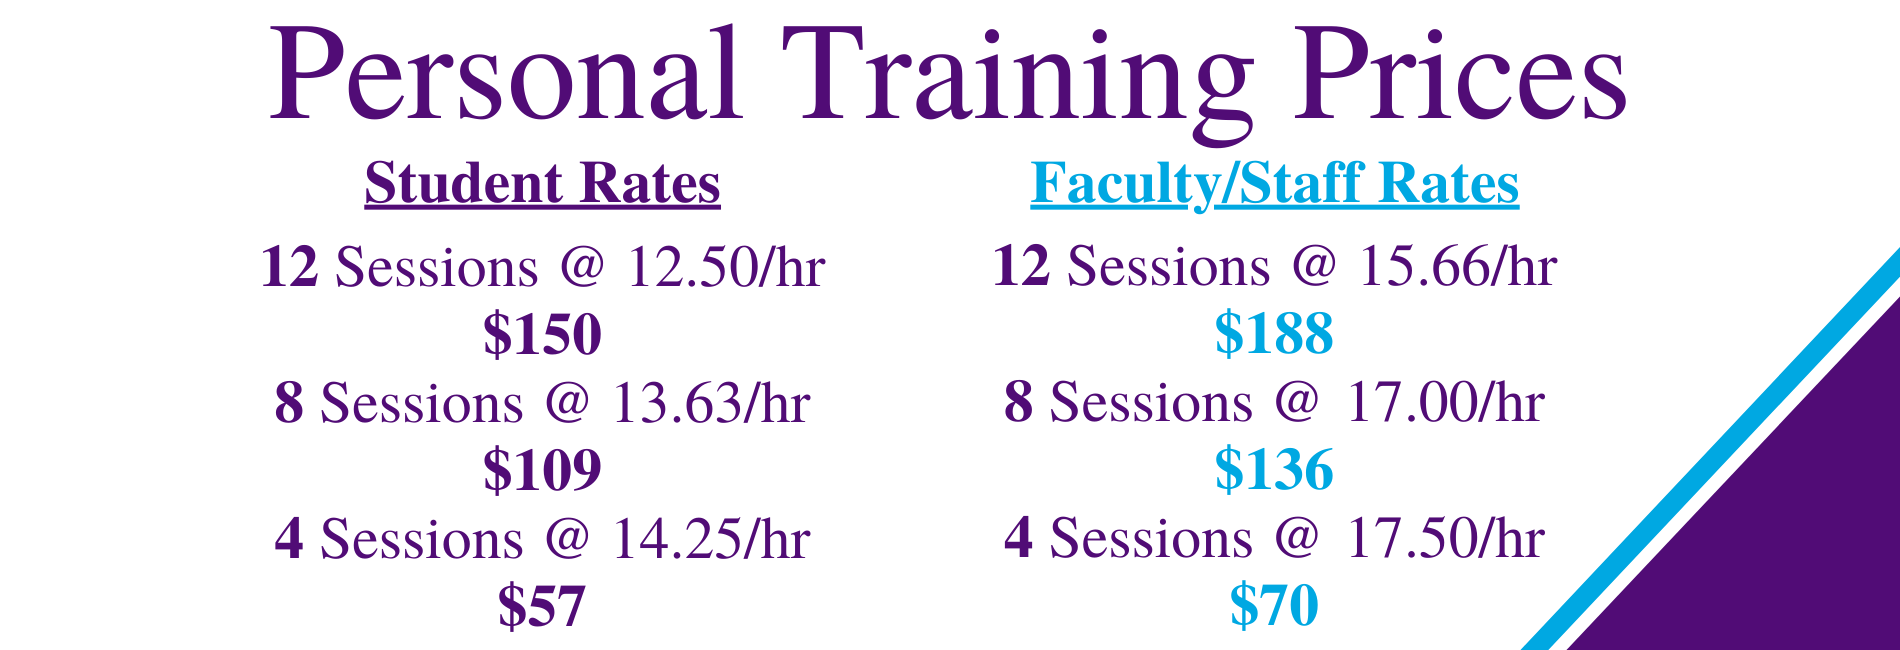 Personal Training Prices 